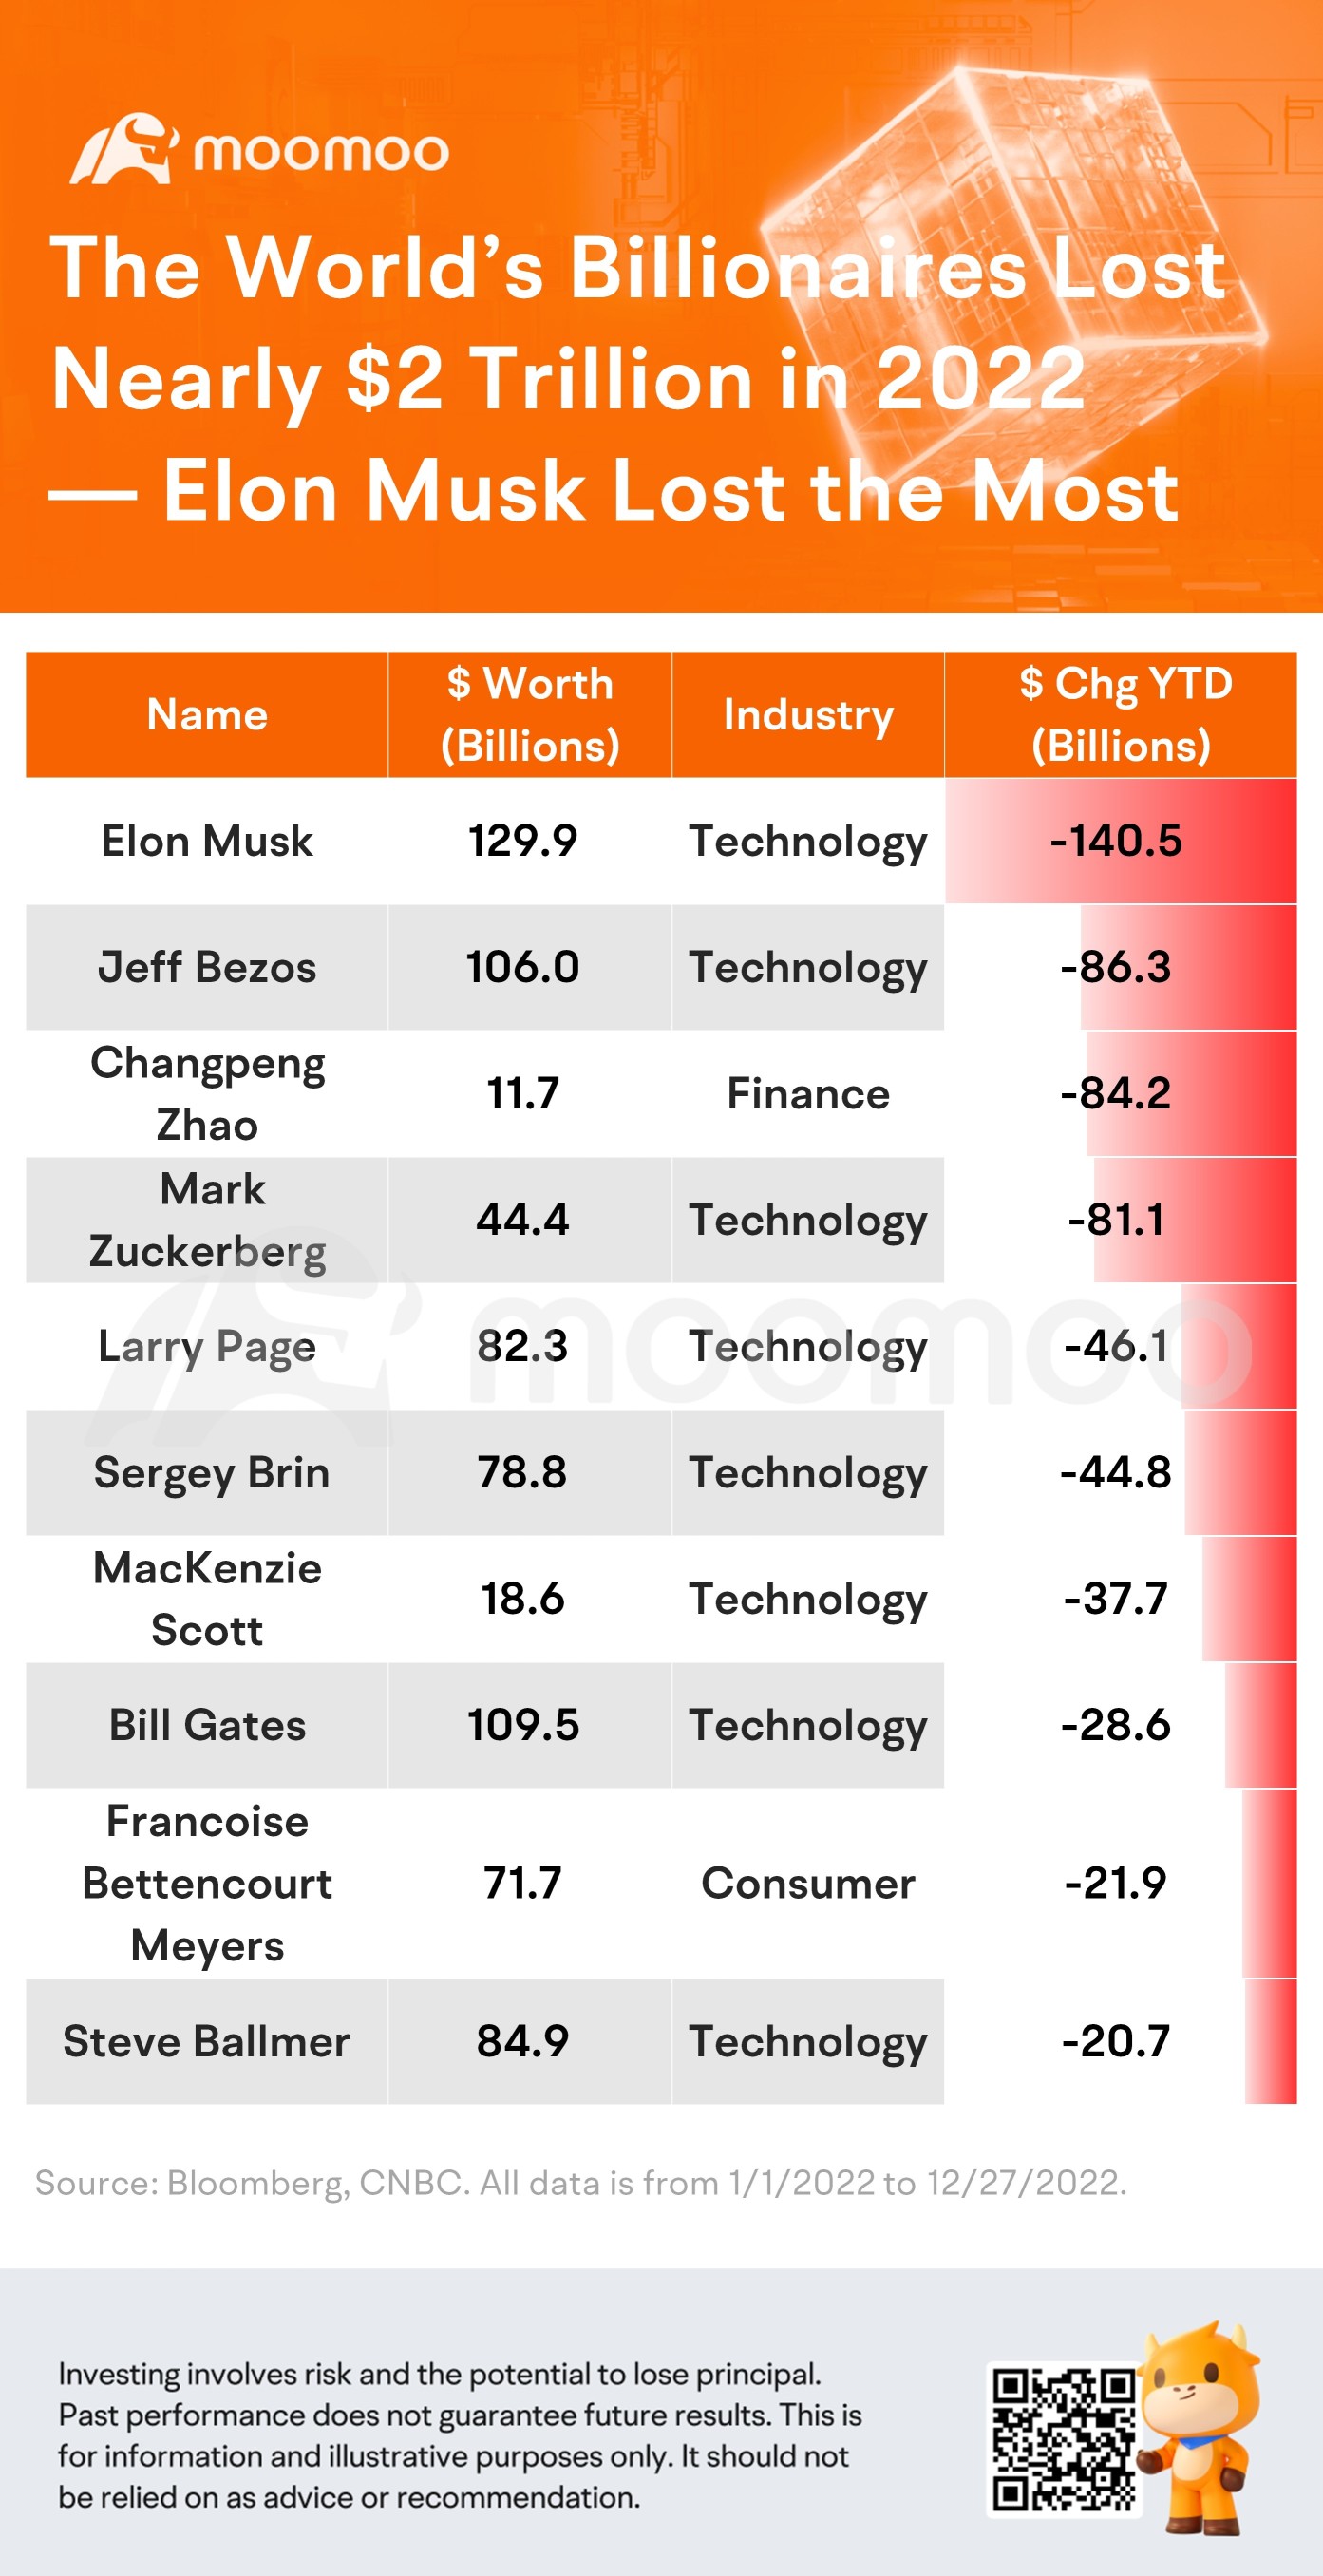 The World's Billionaires Lost Nearly $2 Trillion in 2022 — Elon Musk Lost the Most